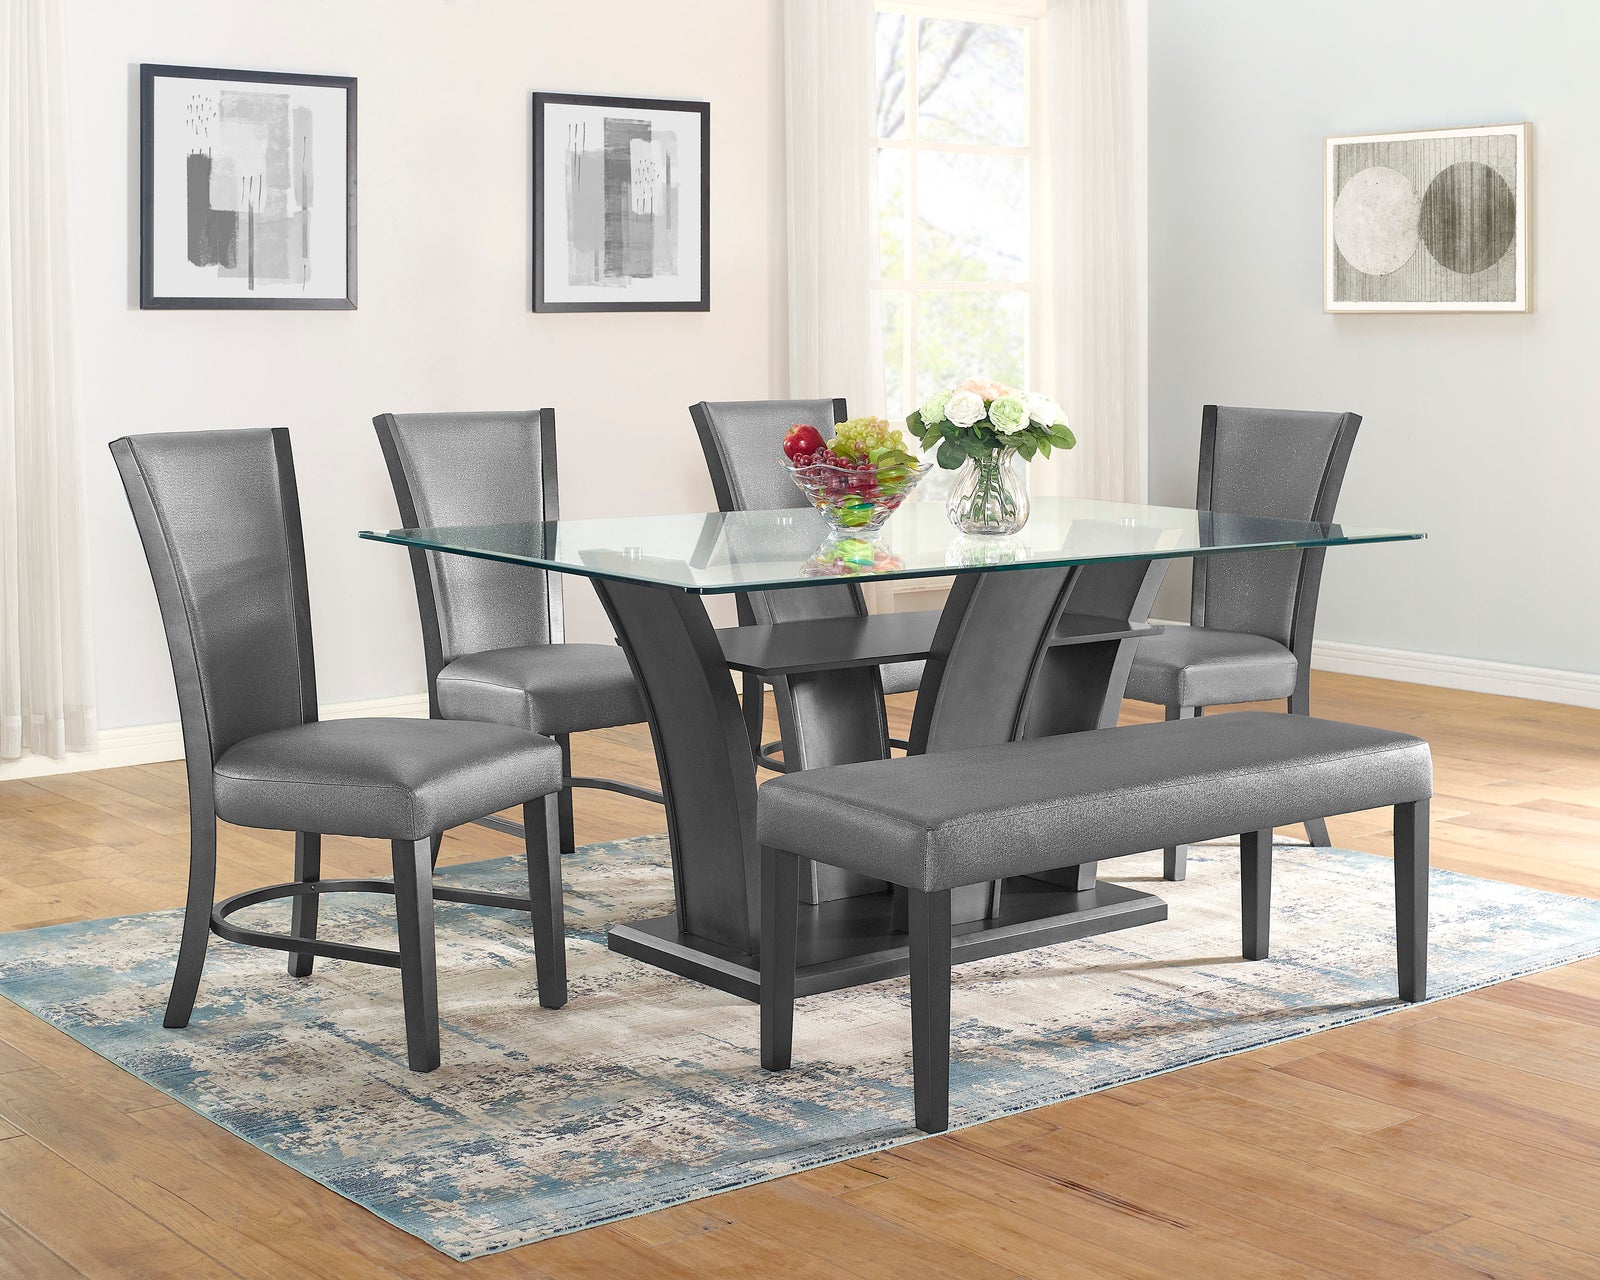 Camelia Gray Modern Solid Wood Glass Faux Leather Dining Room Set